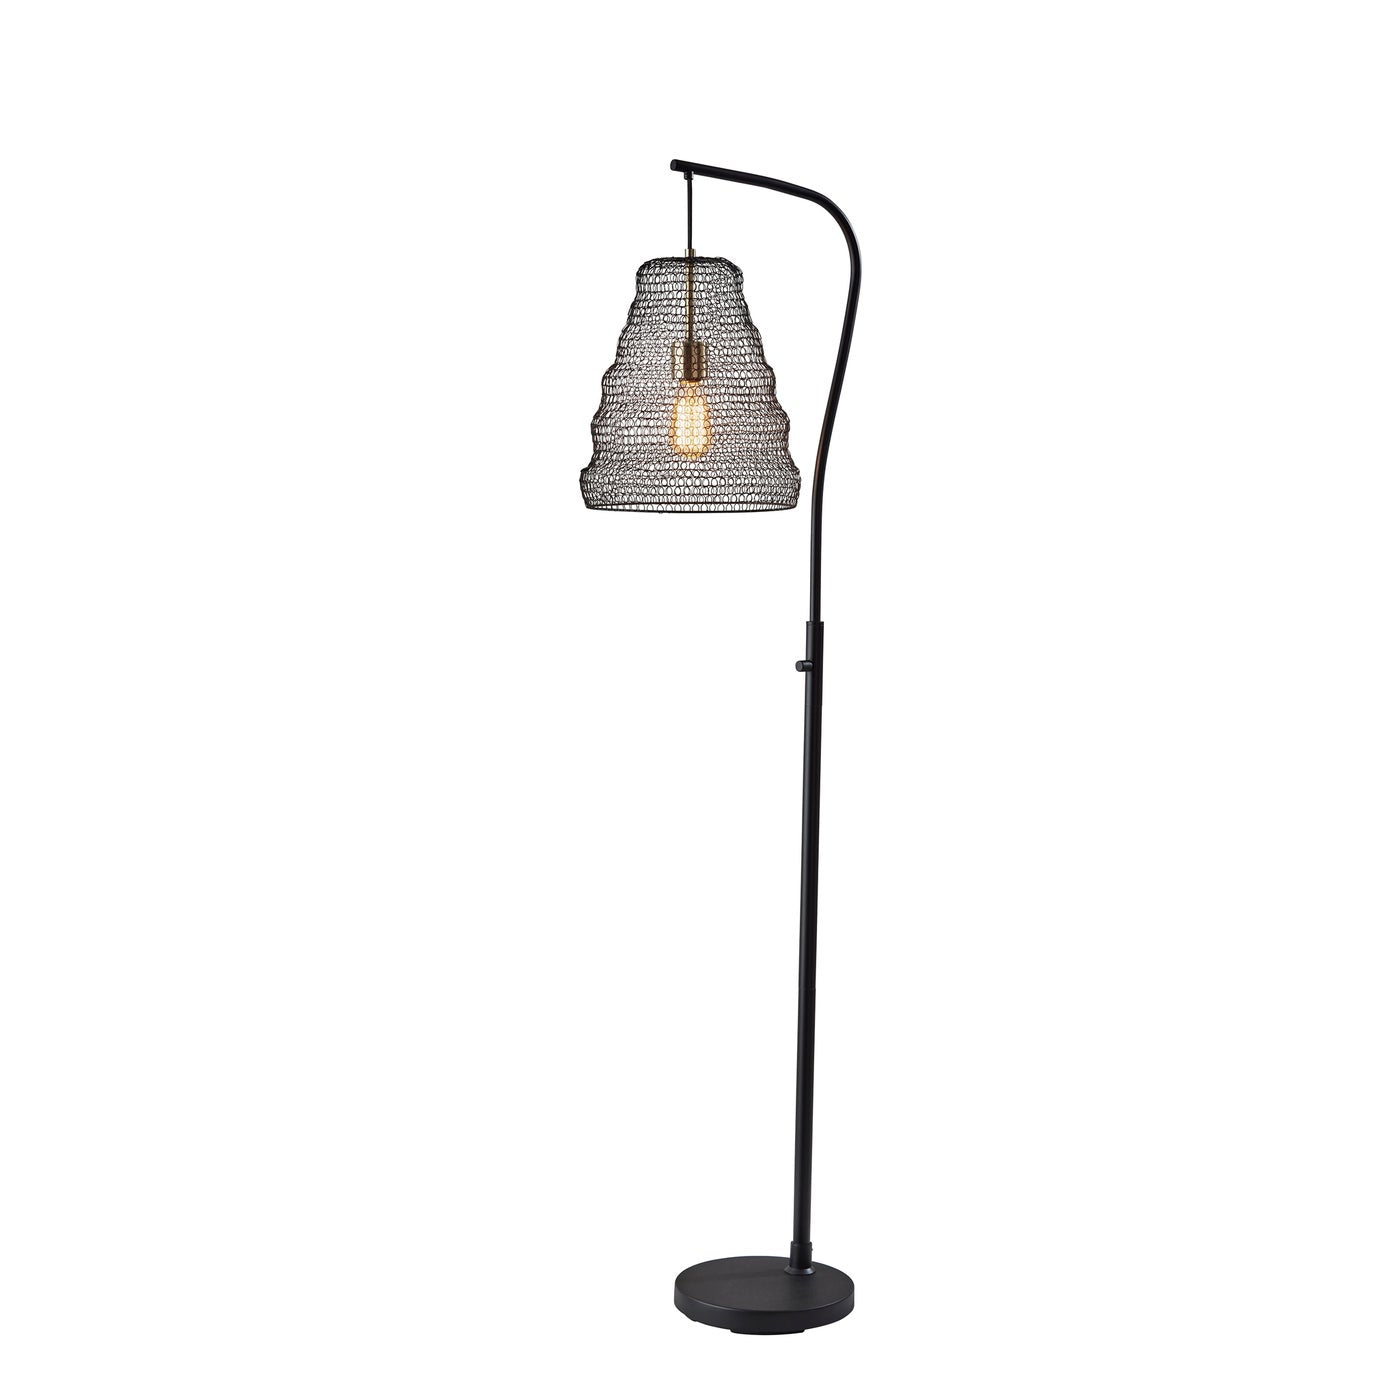 Adesso Home - 3569-01 - Floor Lamp - Sheridan - Black W. Antique Brass Accents